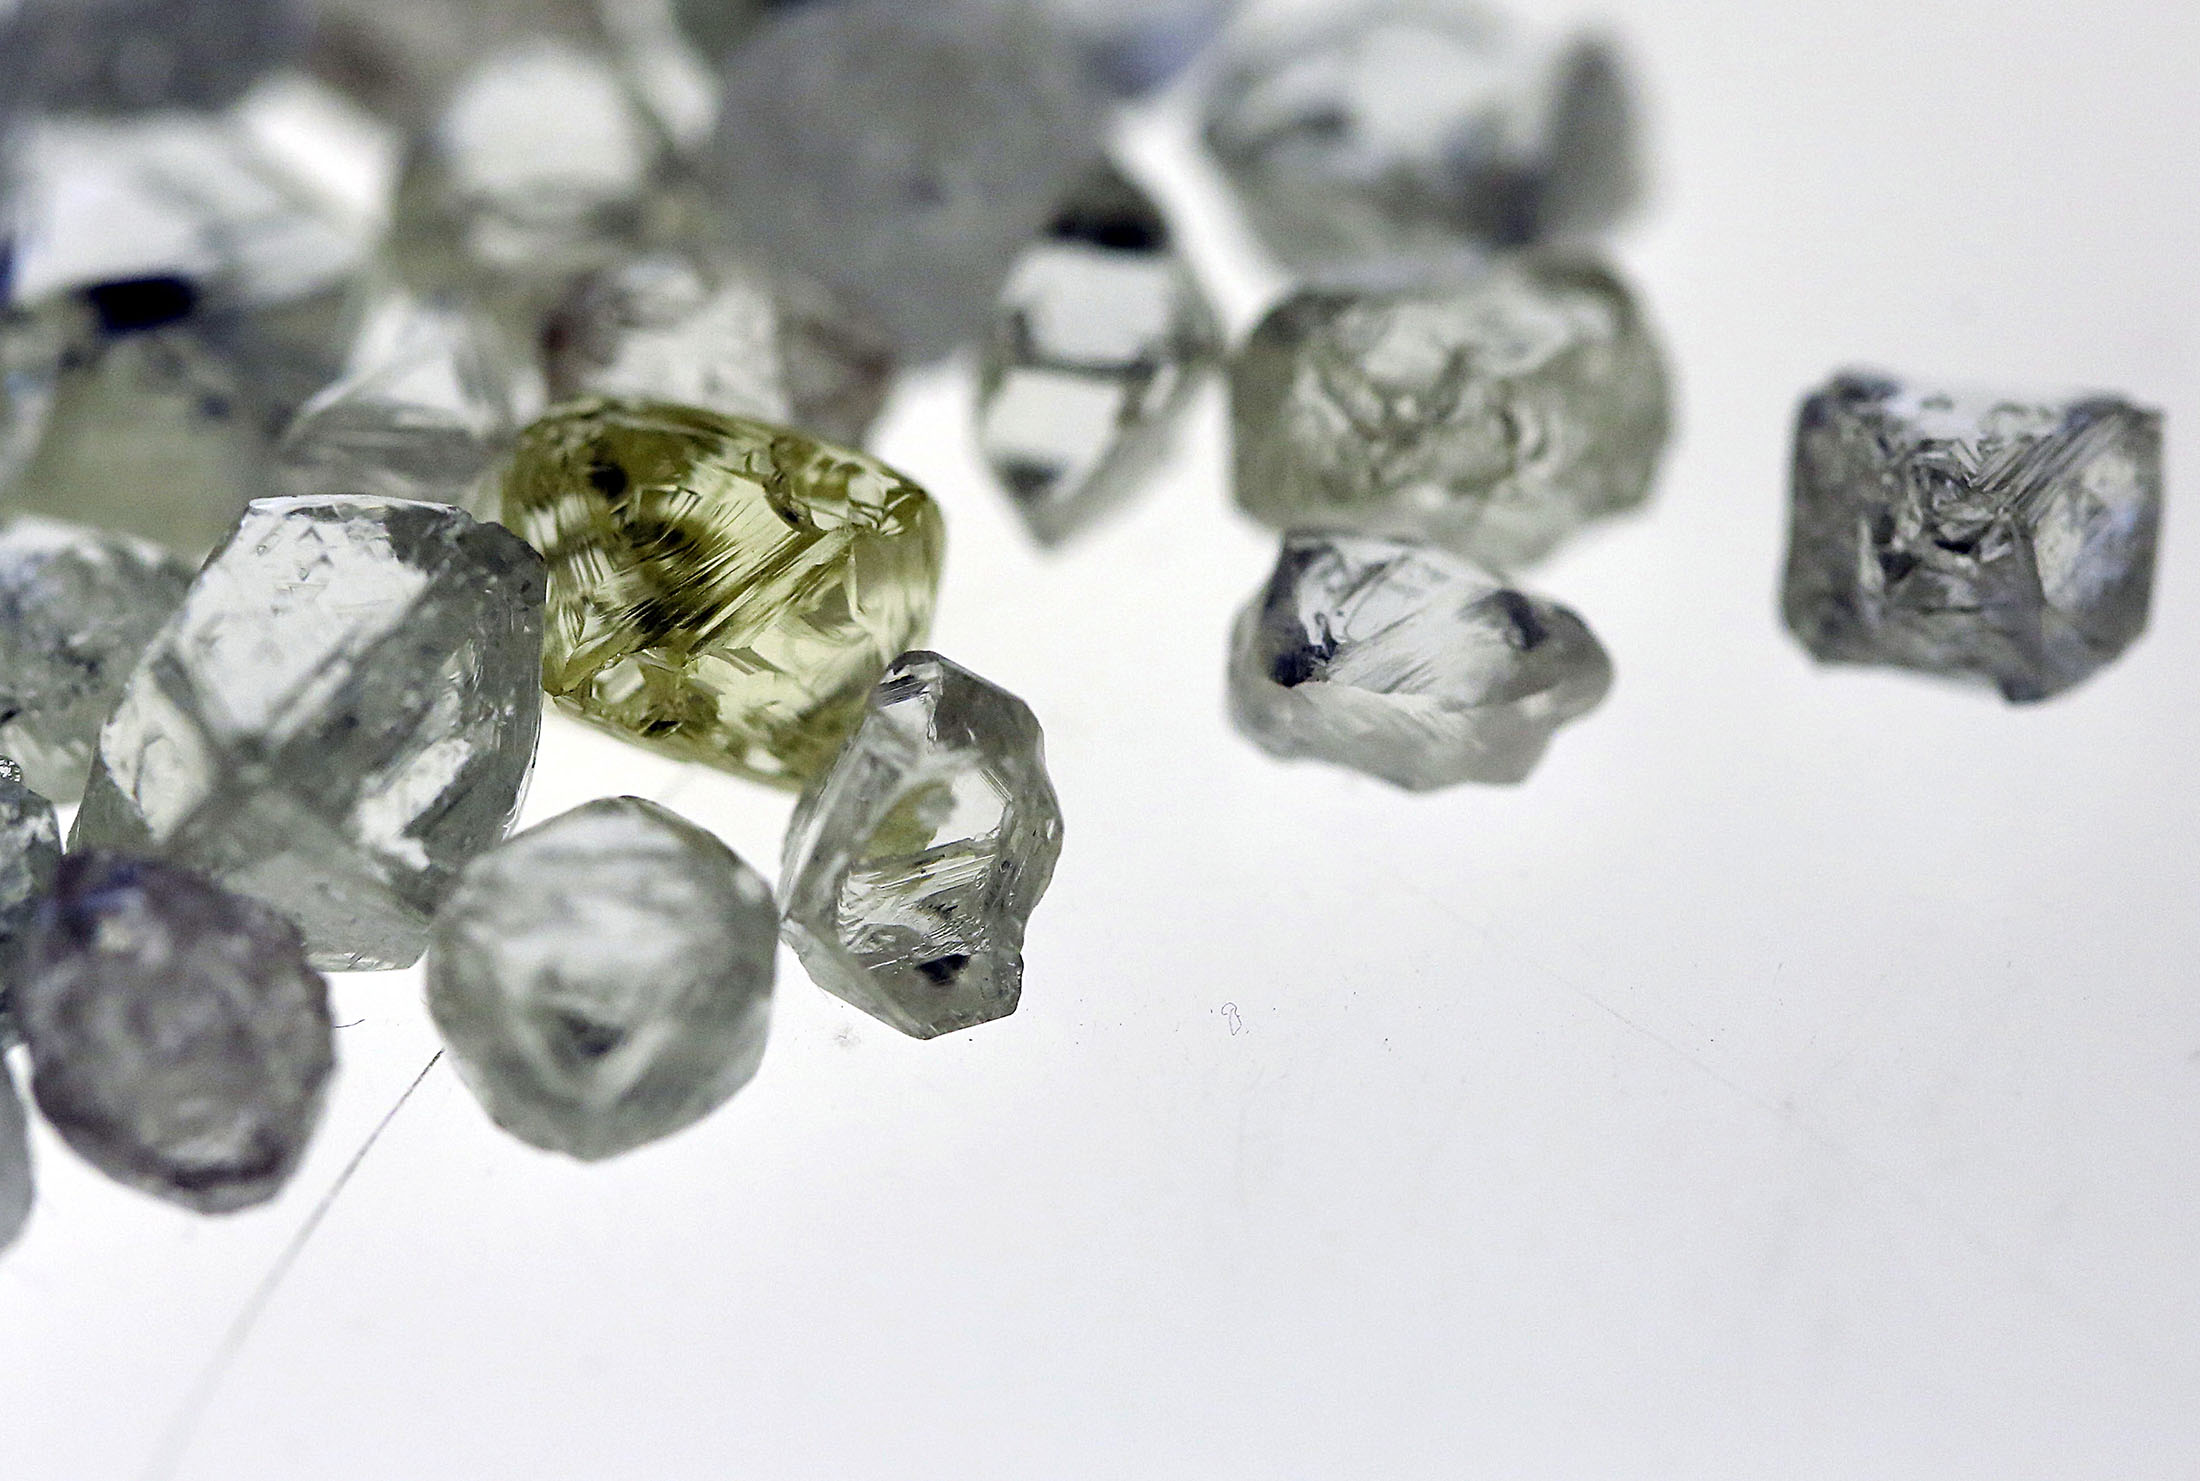 BHP pushes ahead on diamond sale, De Beers out of Canada process